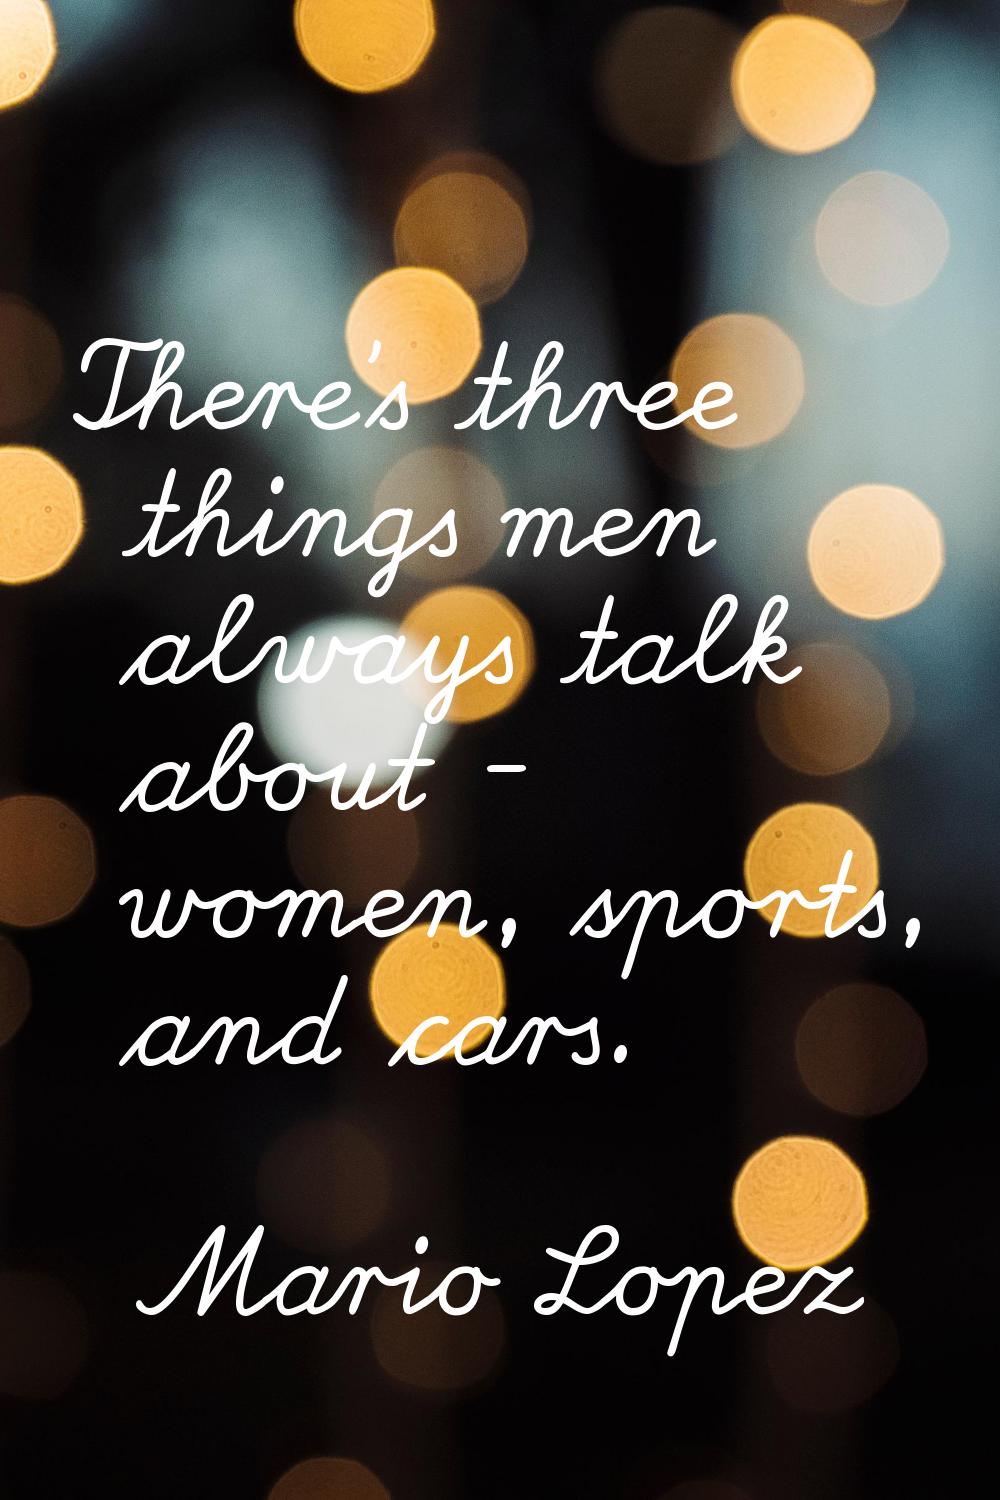 There's three things men always talk about - women, sports, and cars.